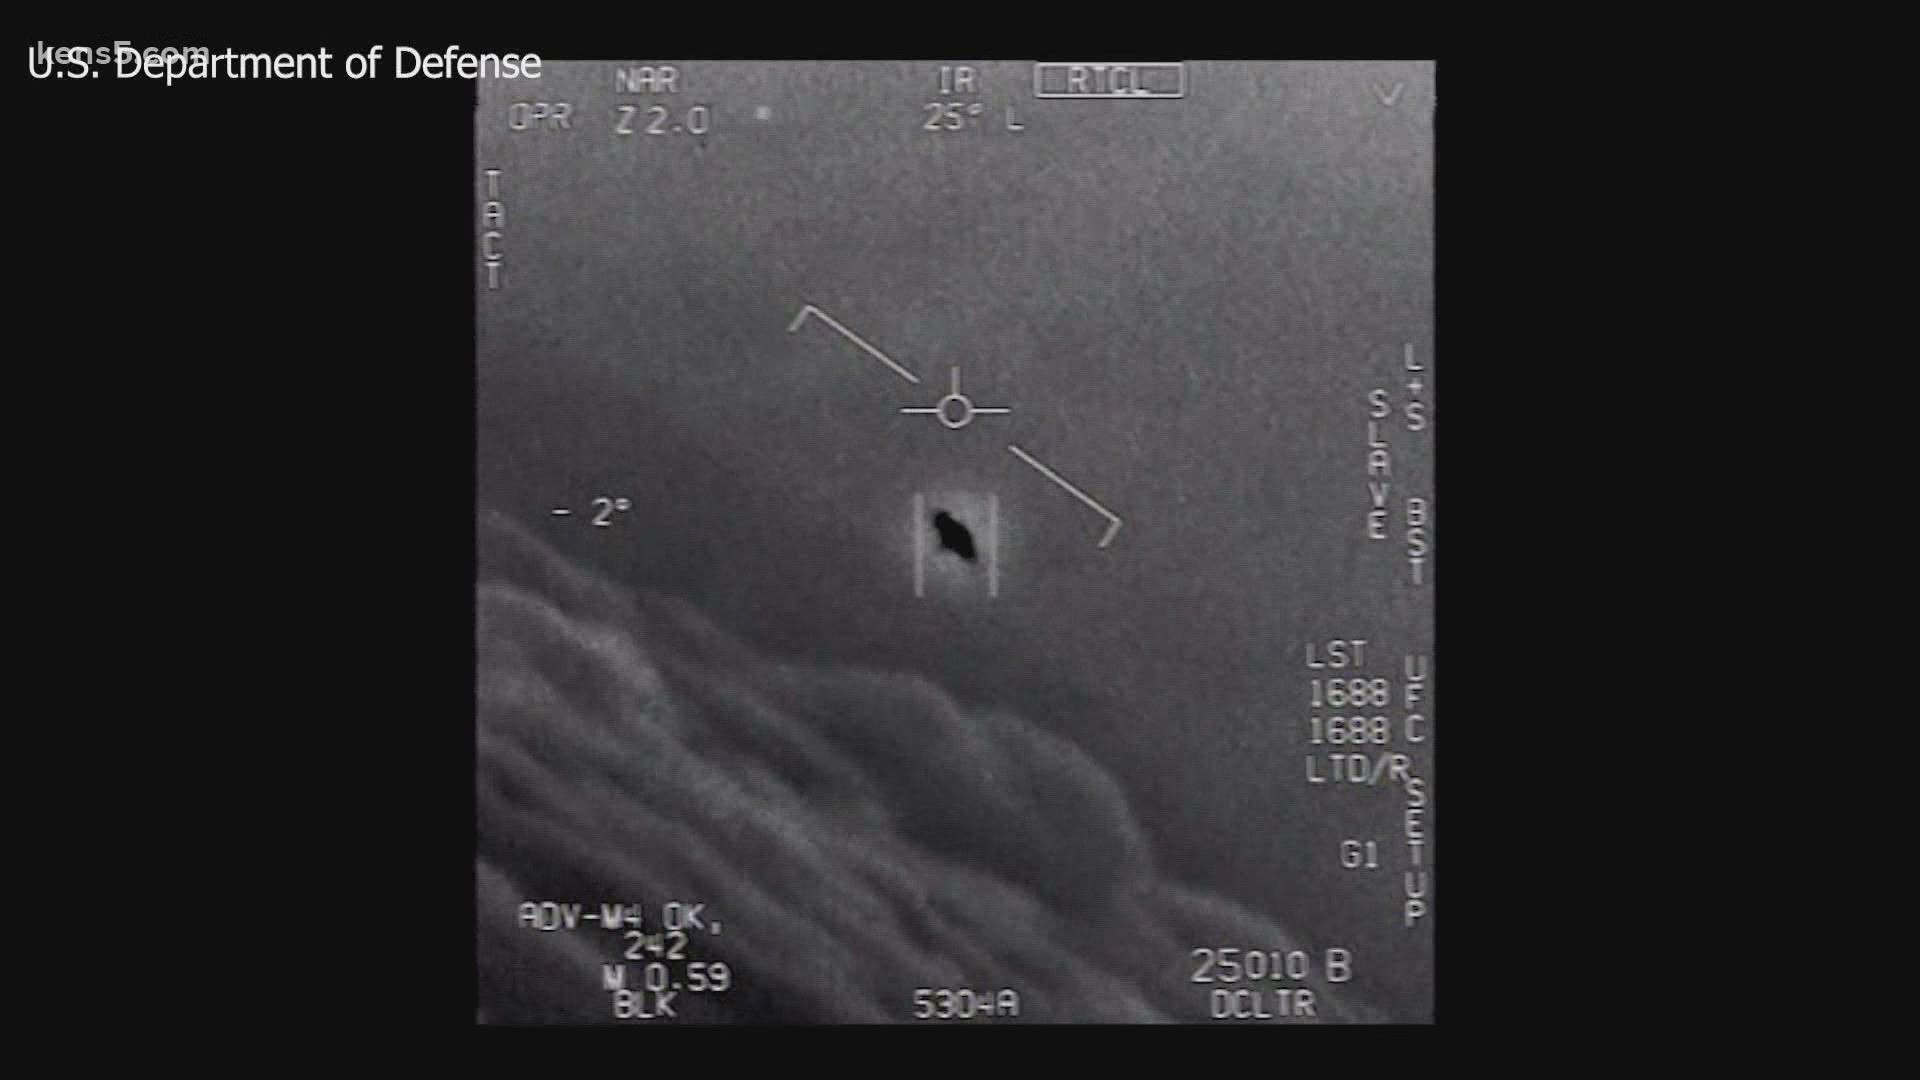 The federal government has indicated it will be taking a more serious approach to unidentified flying objects, and indeed perhaps has in the past.